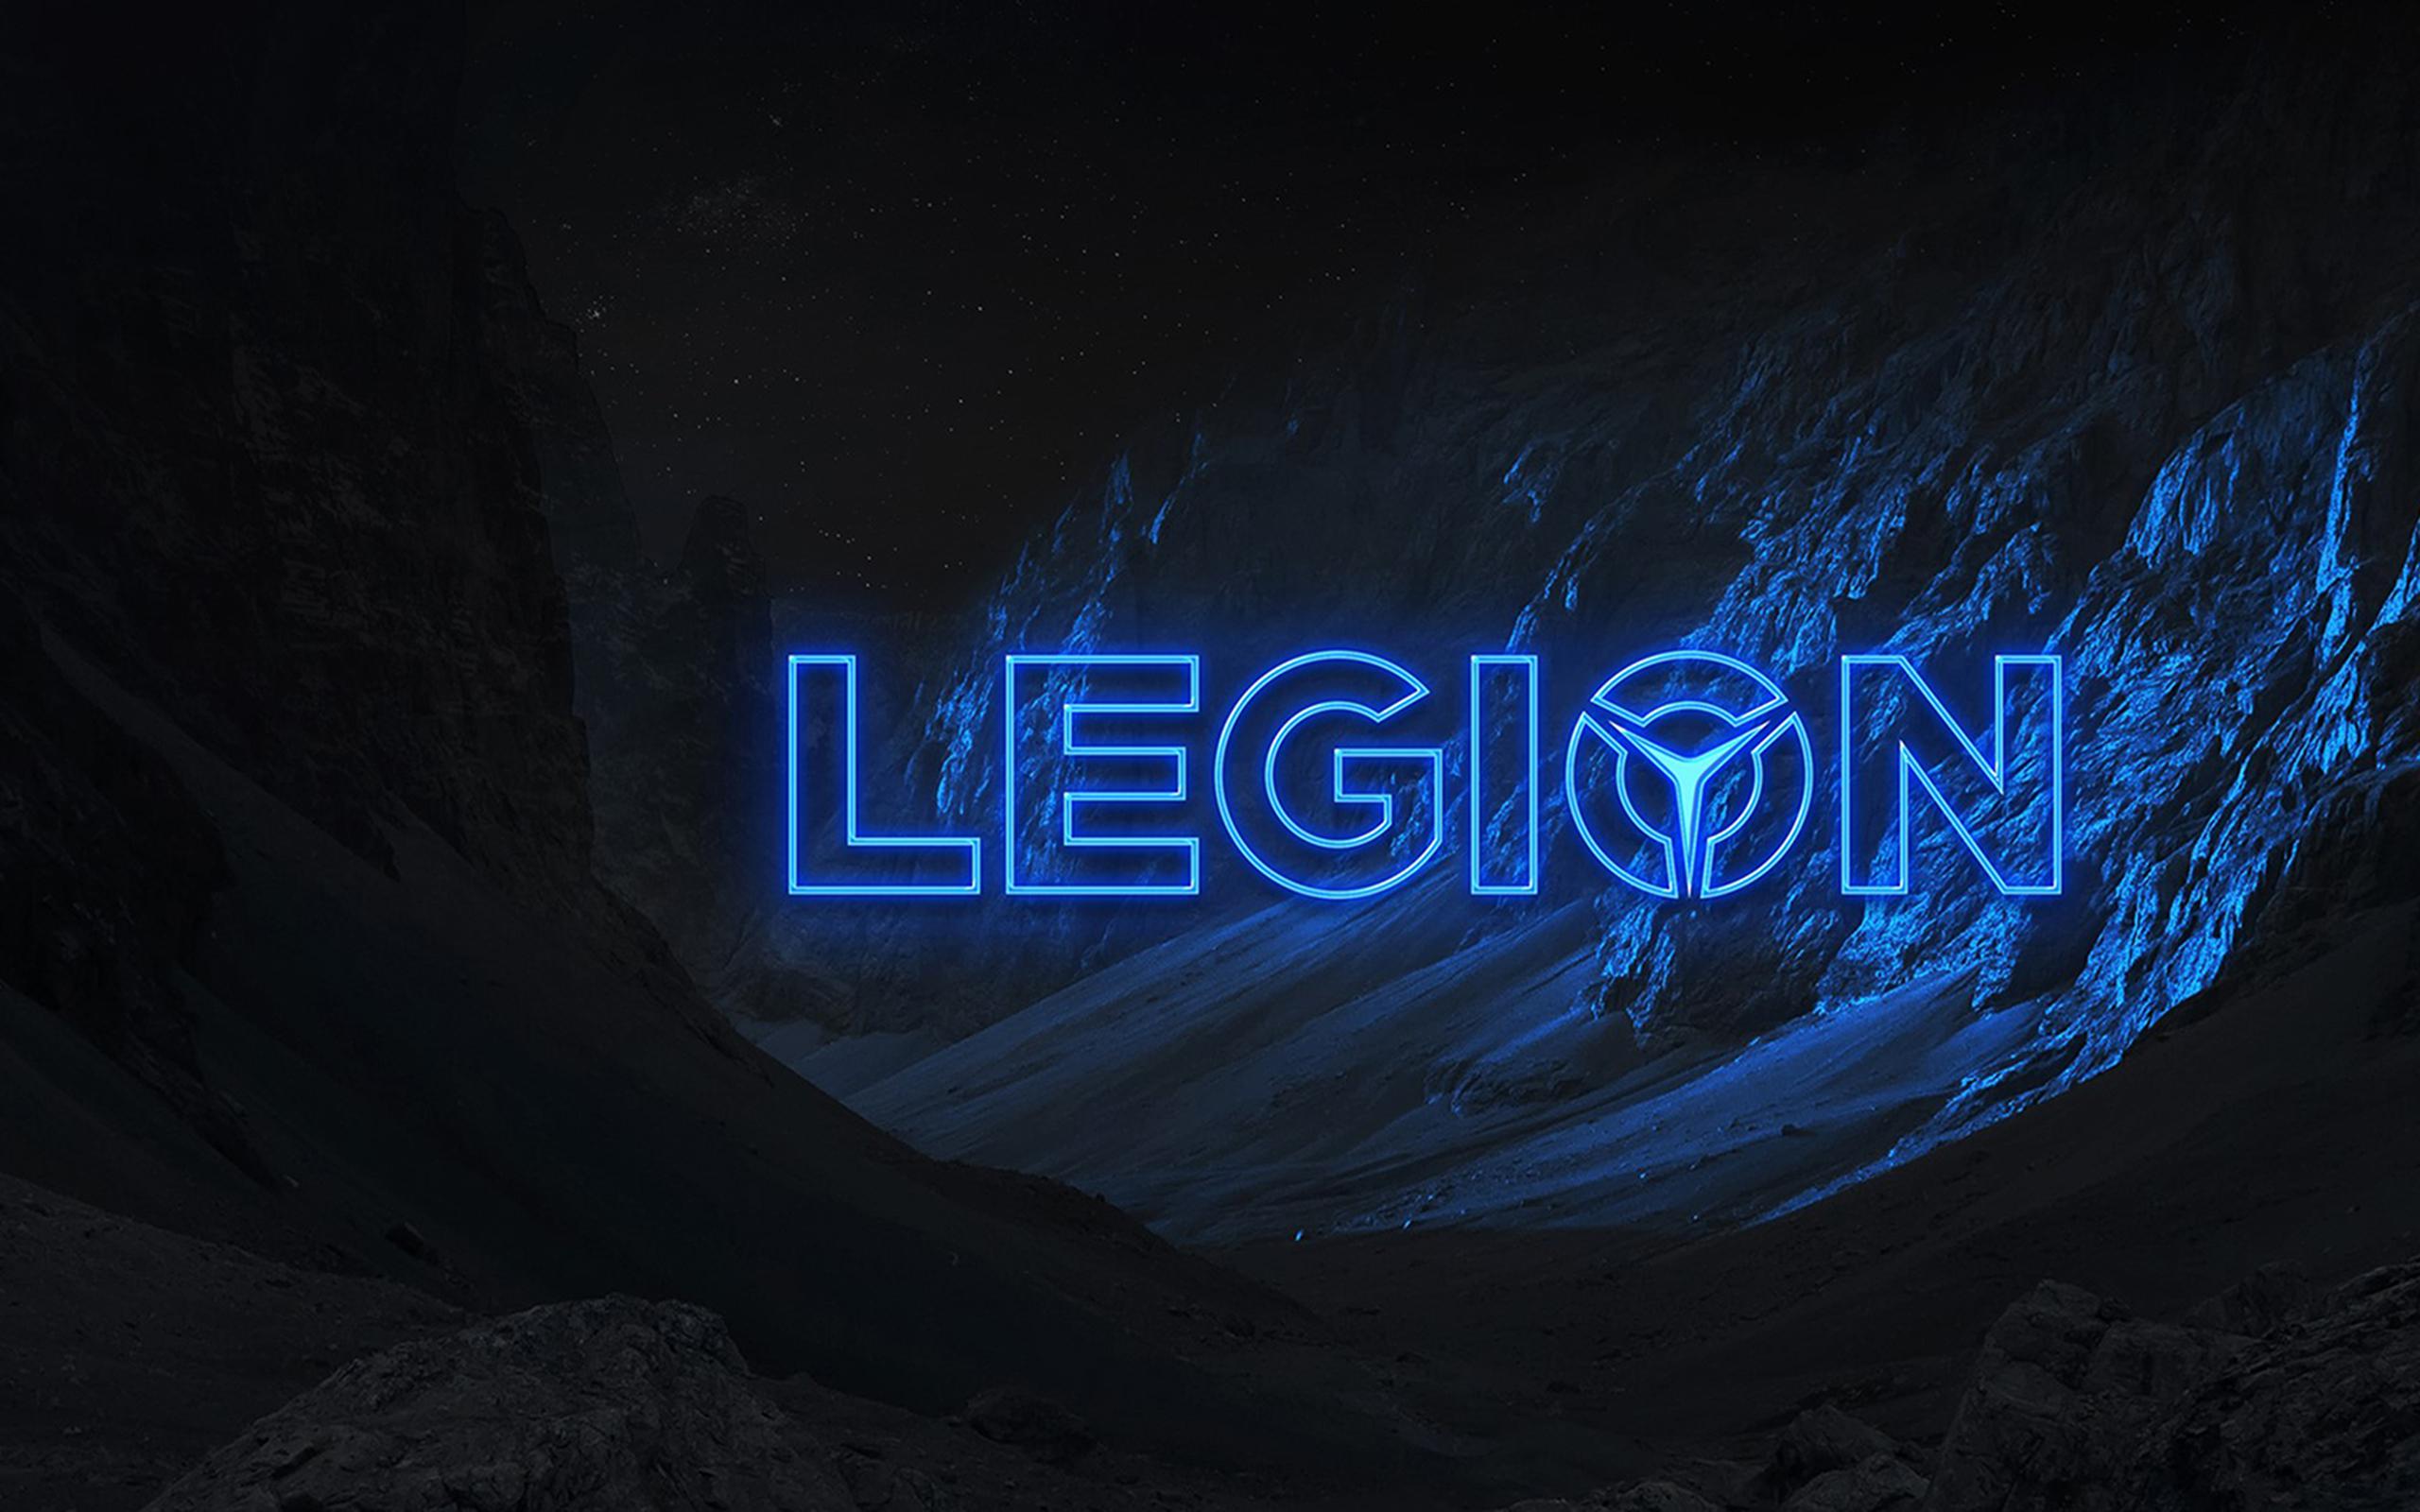 I just want to share my Legion 7 wallpaper